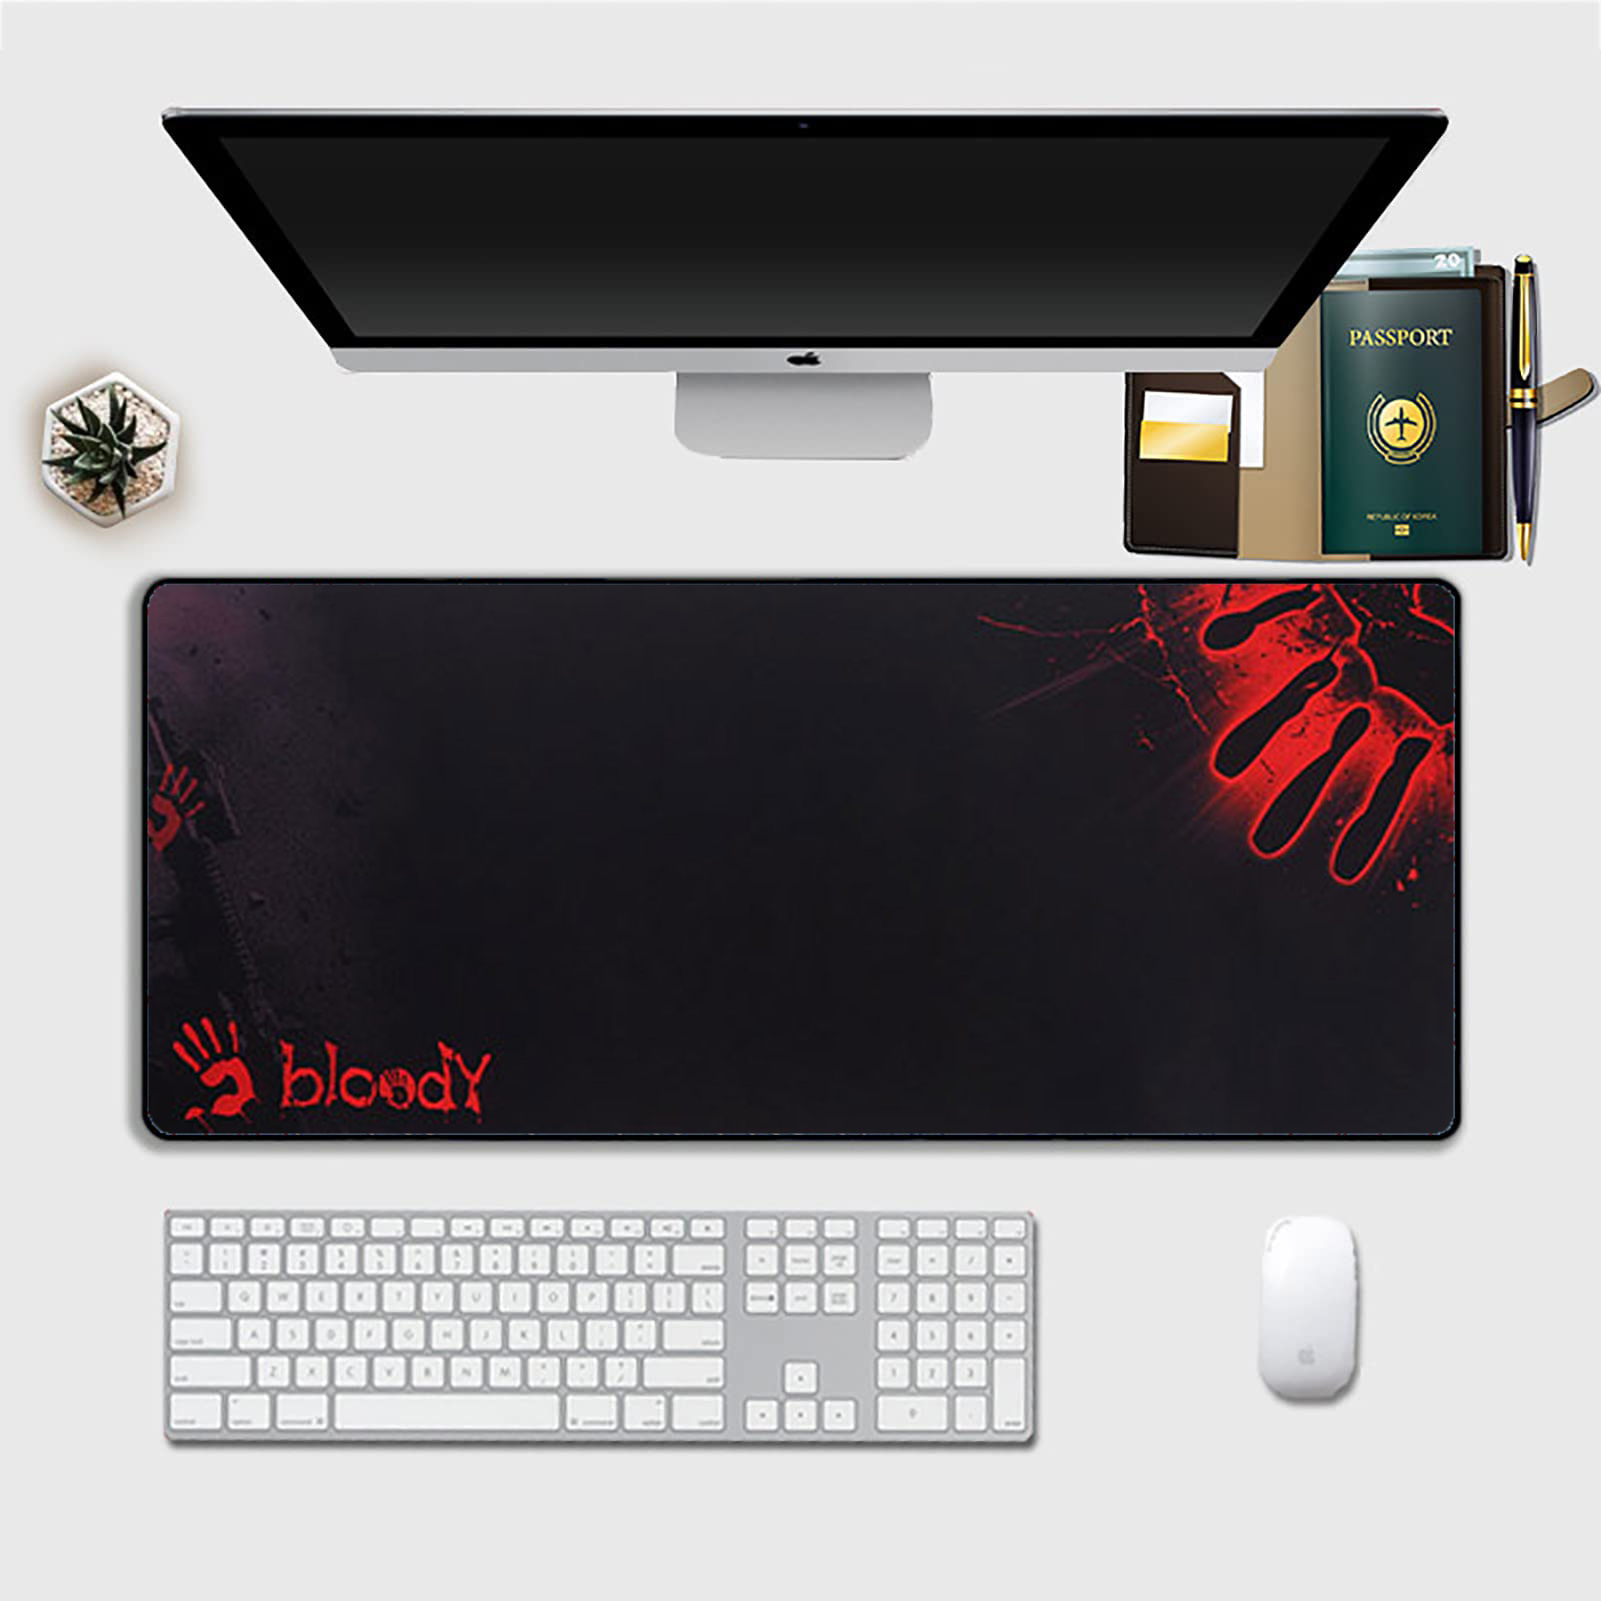 Large Mouse Pads for Gaming and Office Use: Reviews and Ratings